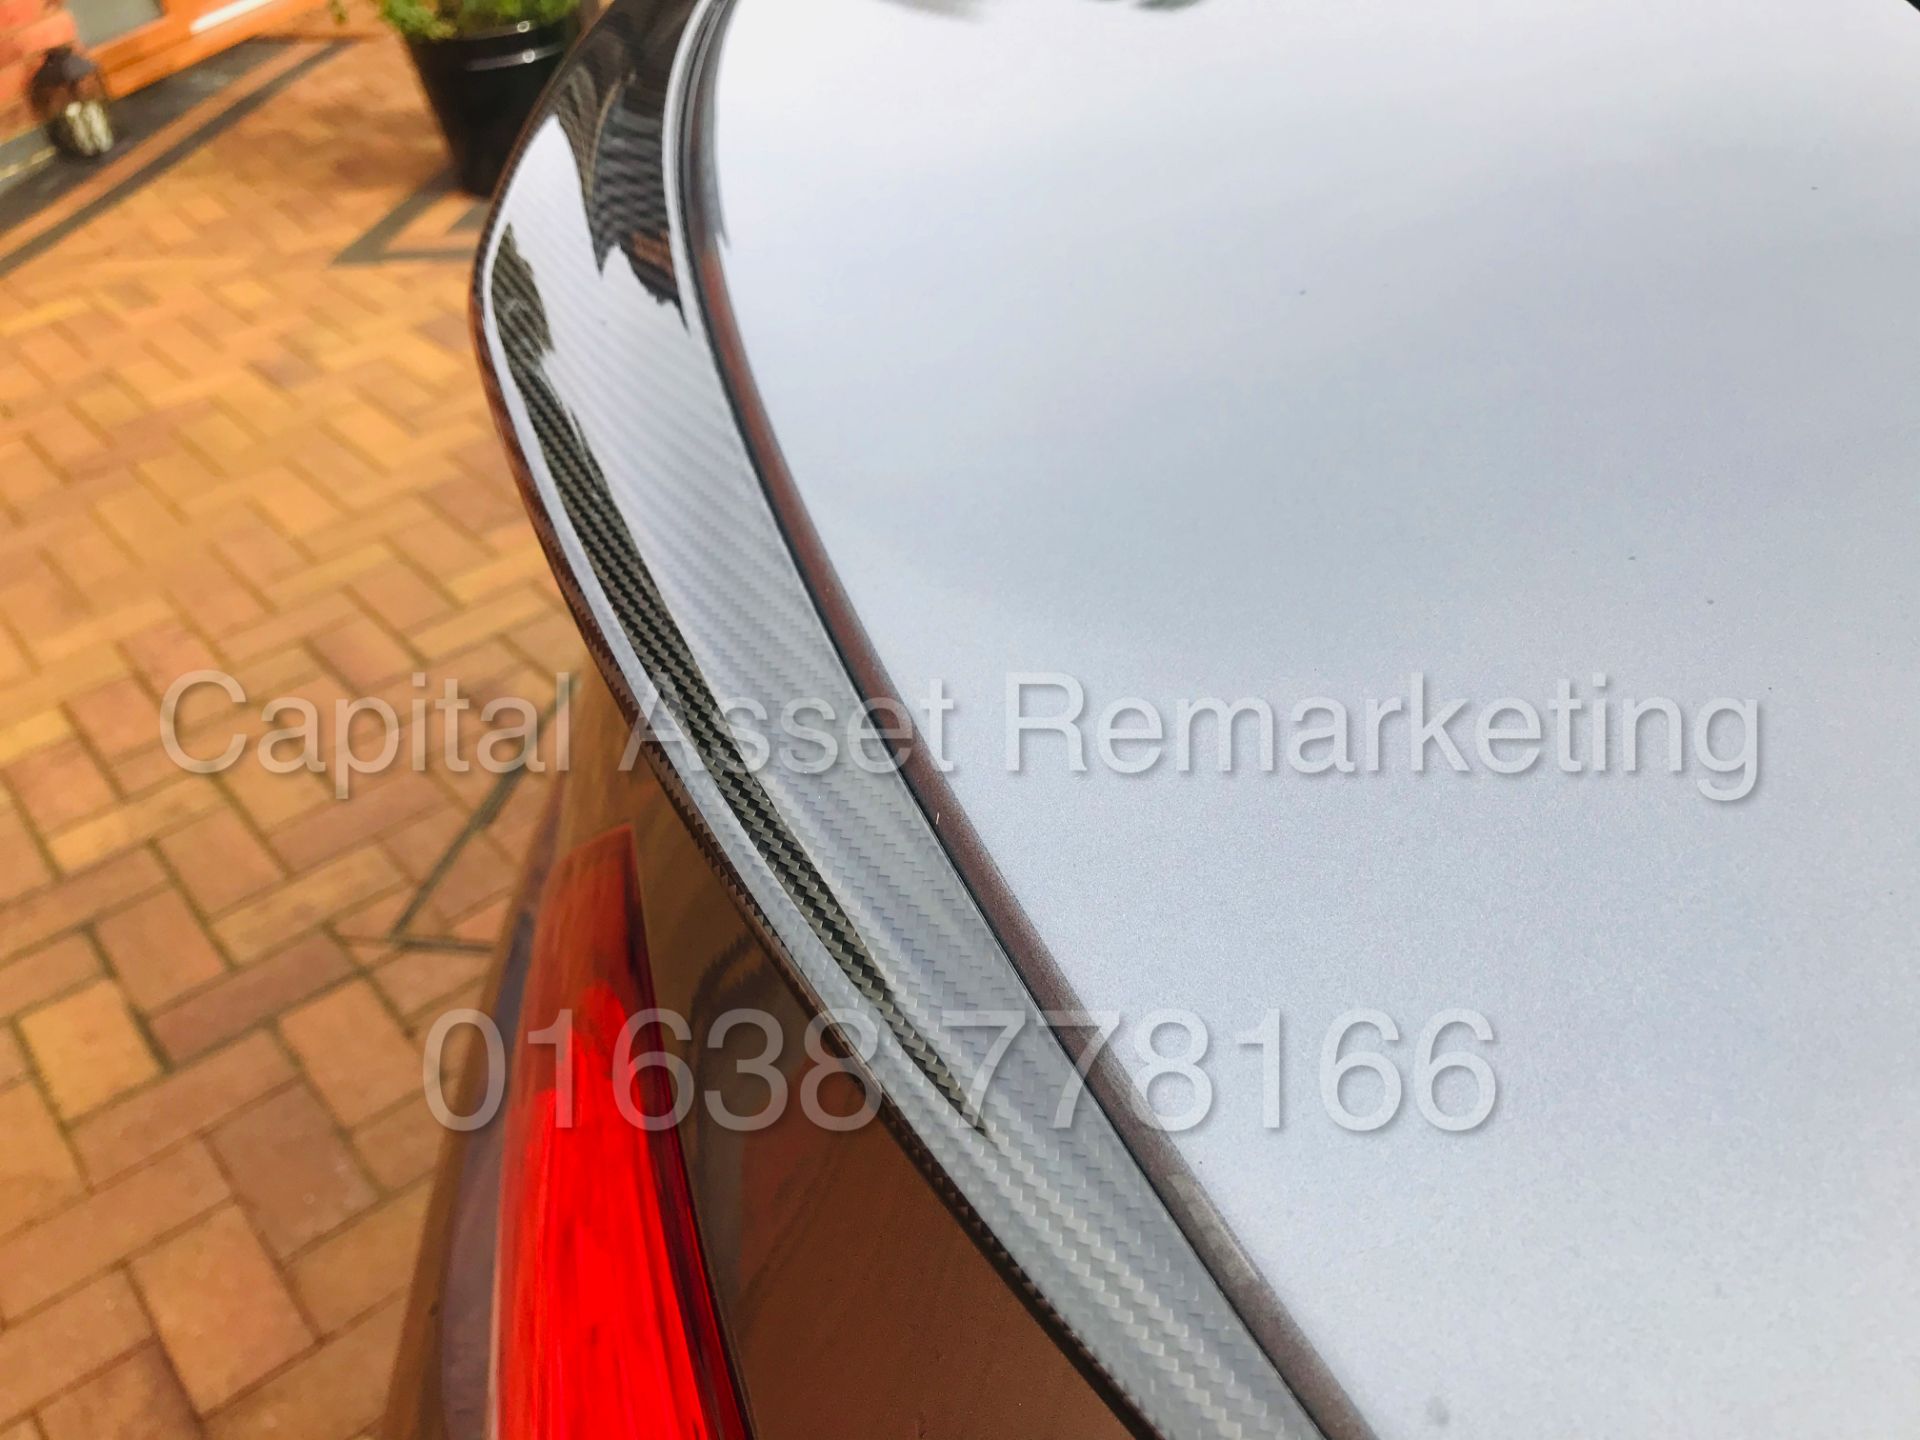 ON SALE MERCEDES-BENZ C43 *AMG BI-TURBO* CABRIOLET (2017) '3.0 V6 - 367 BHP - 4 MATIC - 9 SPEED AUTO - Image 28 of 59